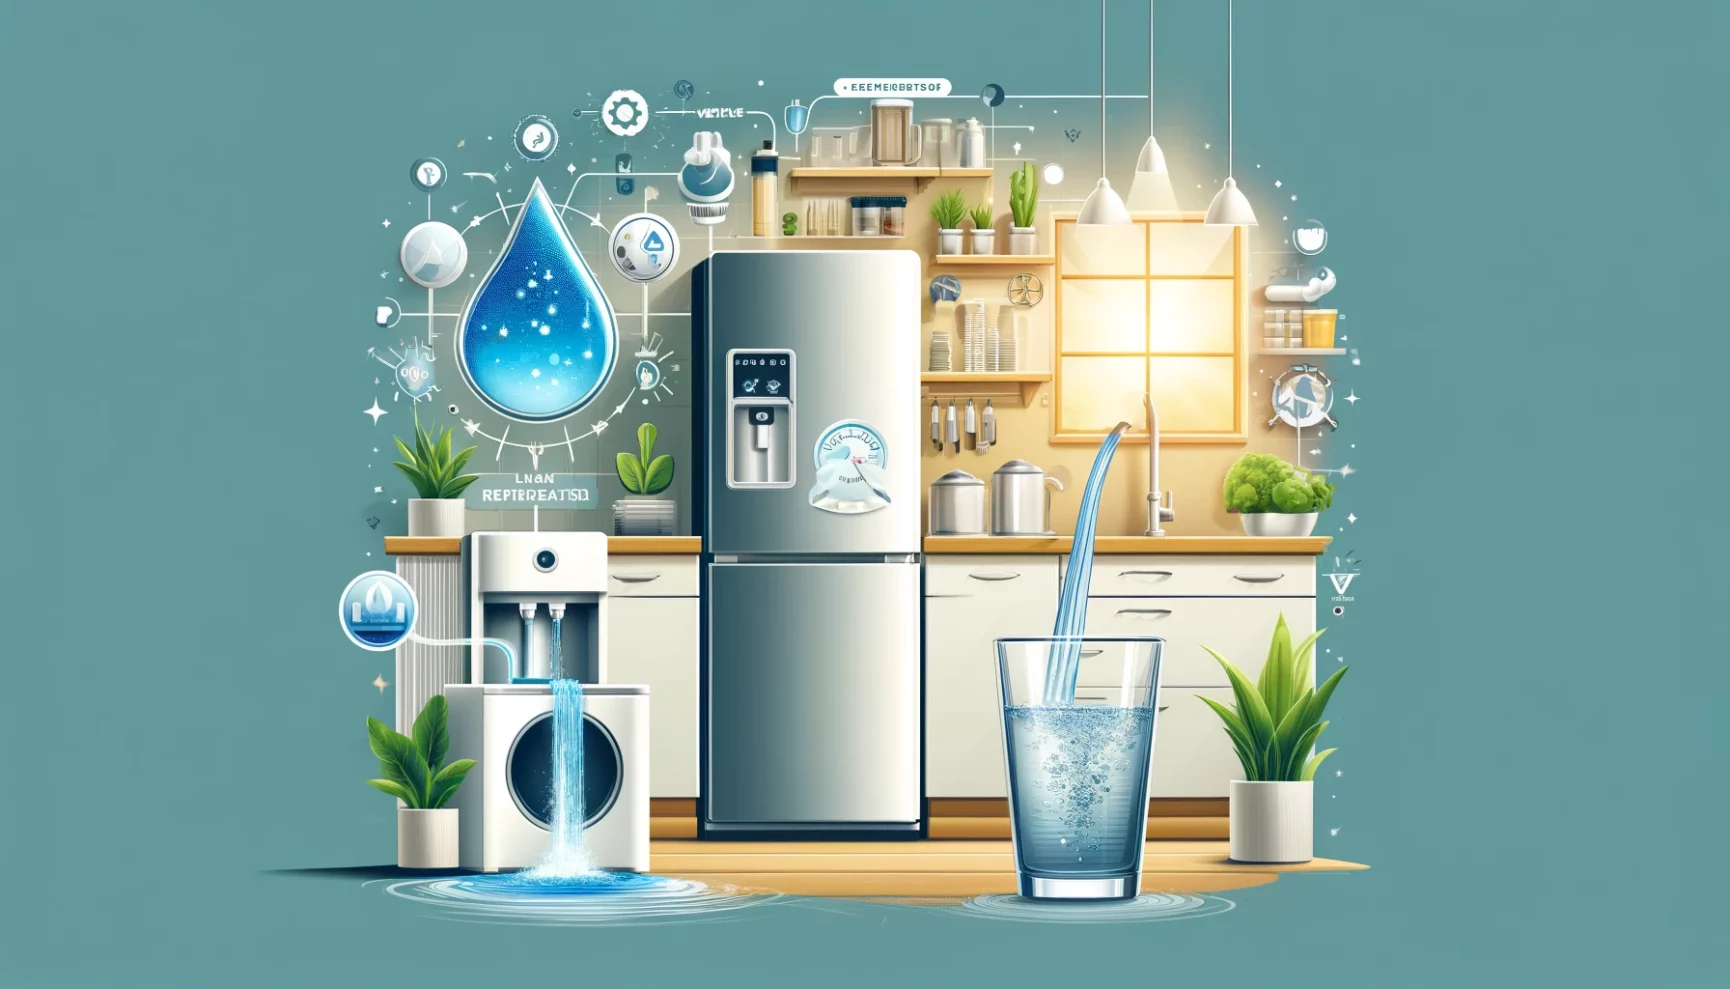 An illustrated concept of a smart kitchen focusing on water purification and appliance connectivity.